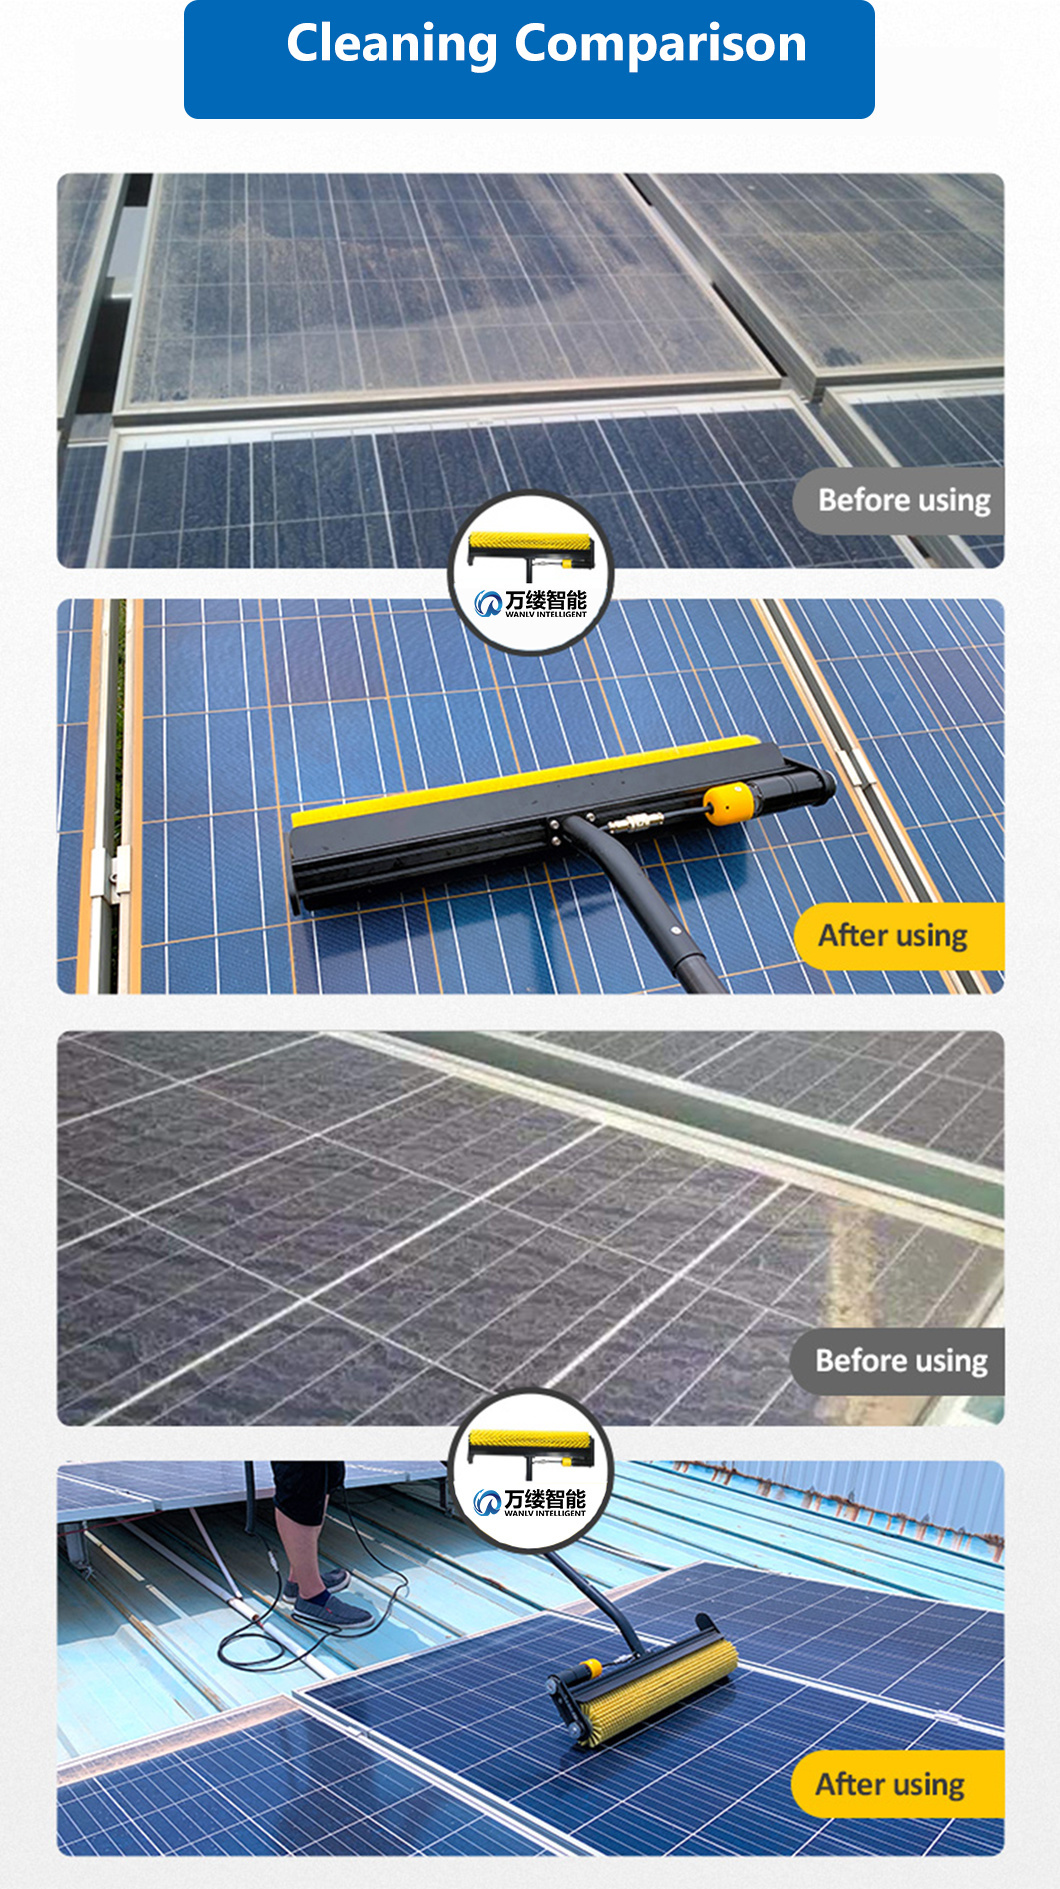 Water Powered Rotary Brush Cleaner for Solar Panel Cleaning and Washing